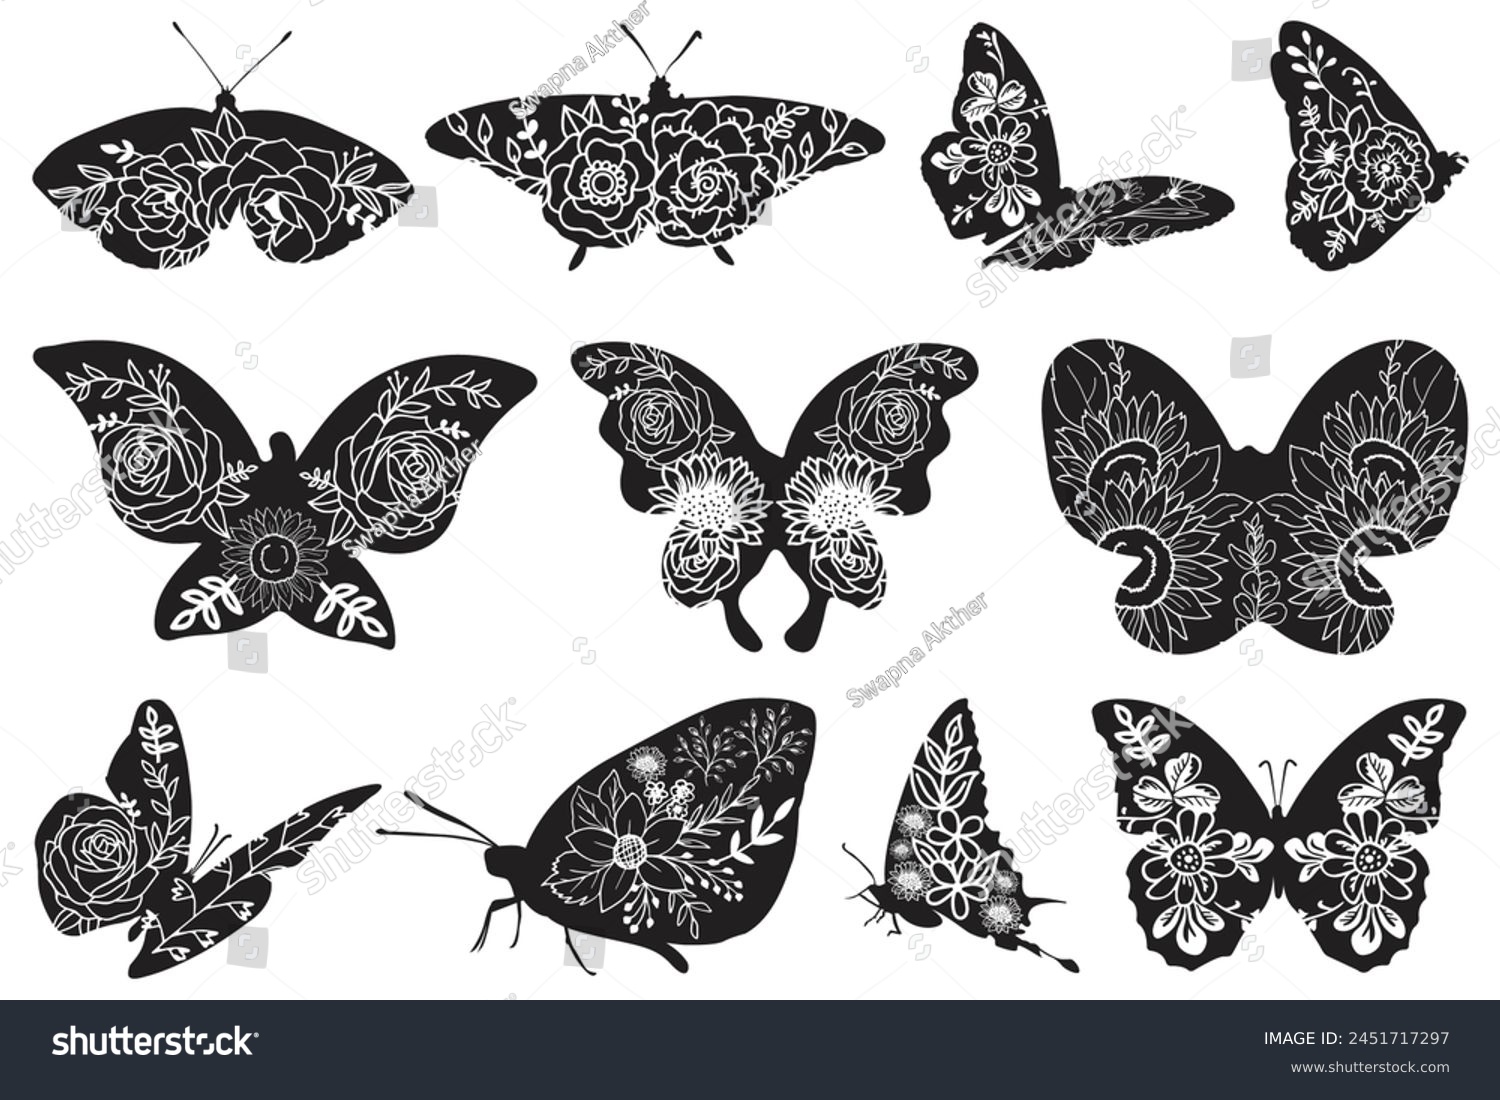 SVG of Flowers and butterfly design Bundle.. Floral butterfly silhouette set Bundle. Vector monochrome illustration isolated on a white background. Various moths with flower wings Bundle. svg